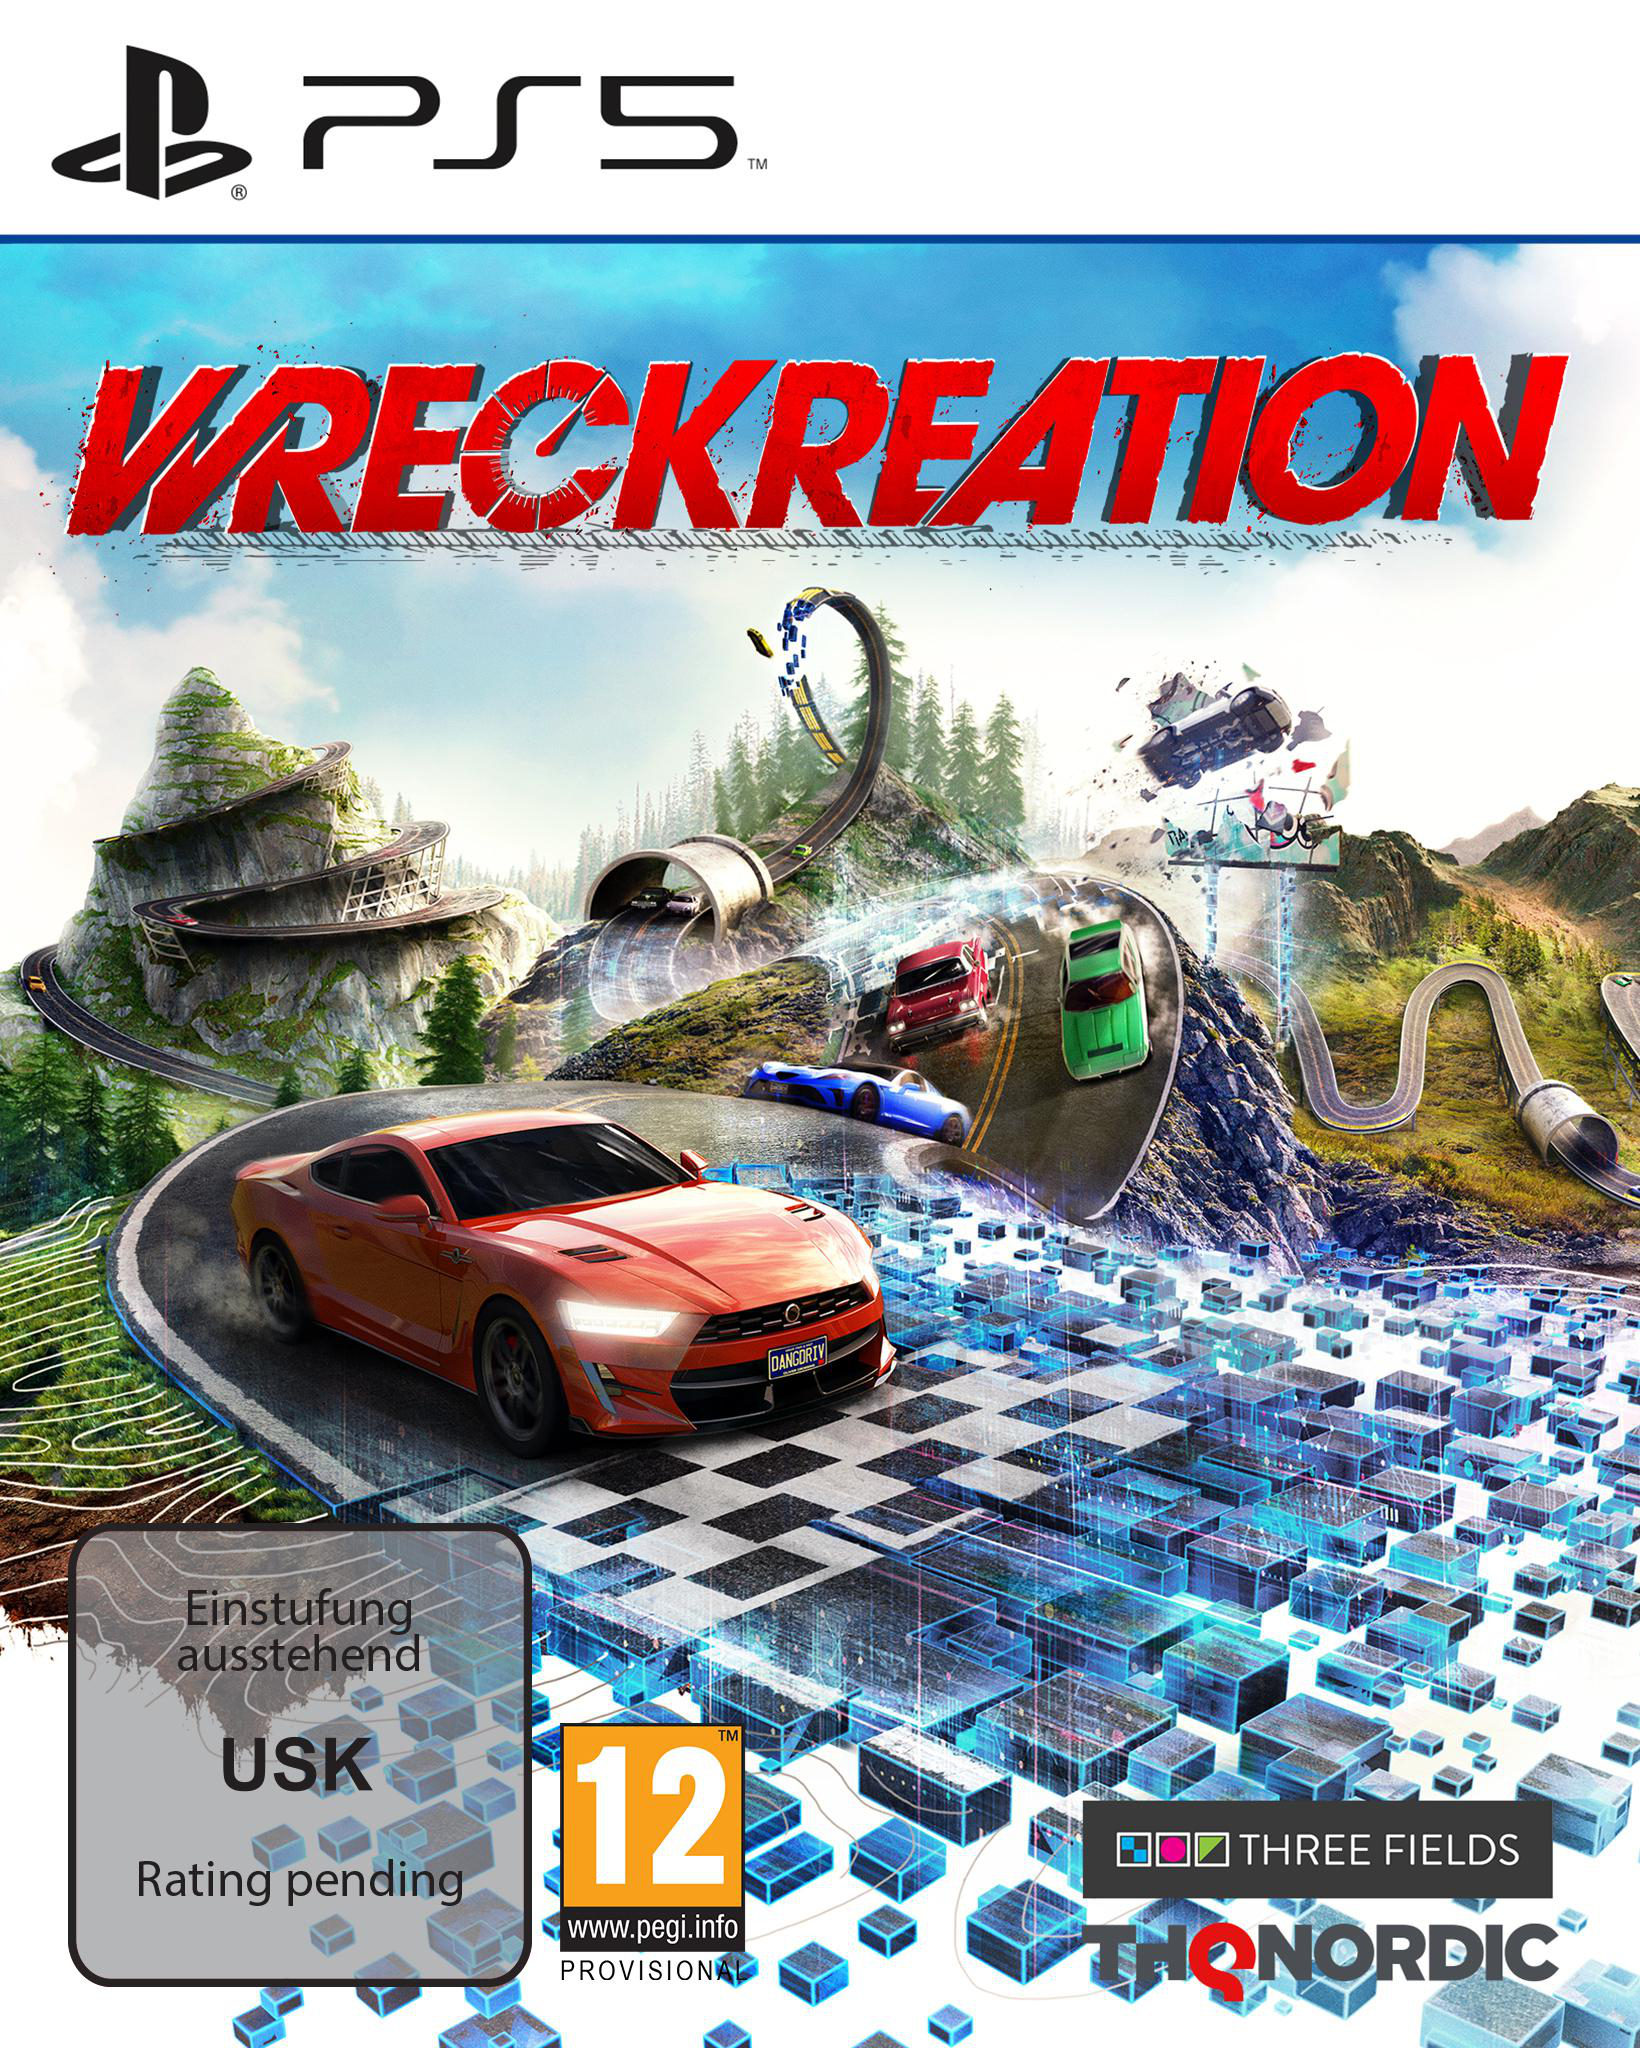 5] Wreckreation - [PlayStation